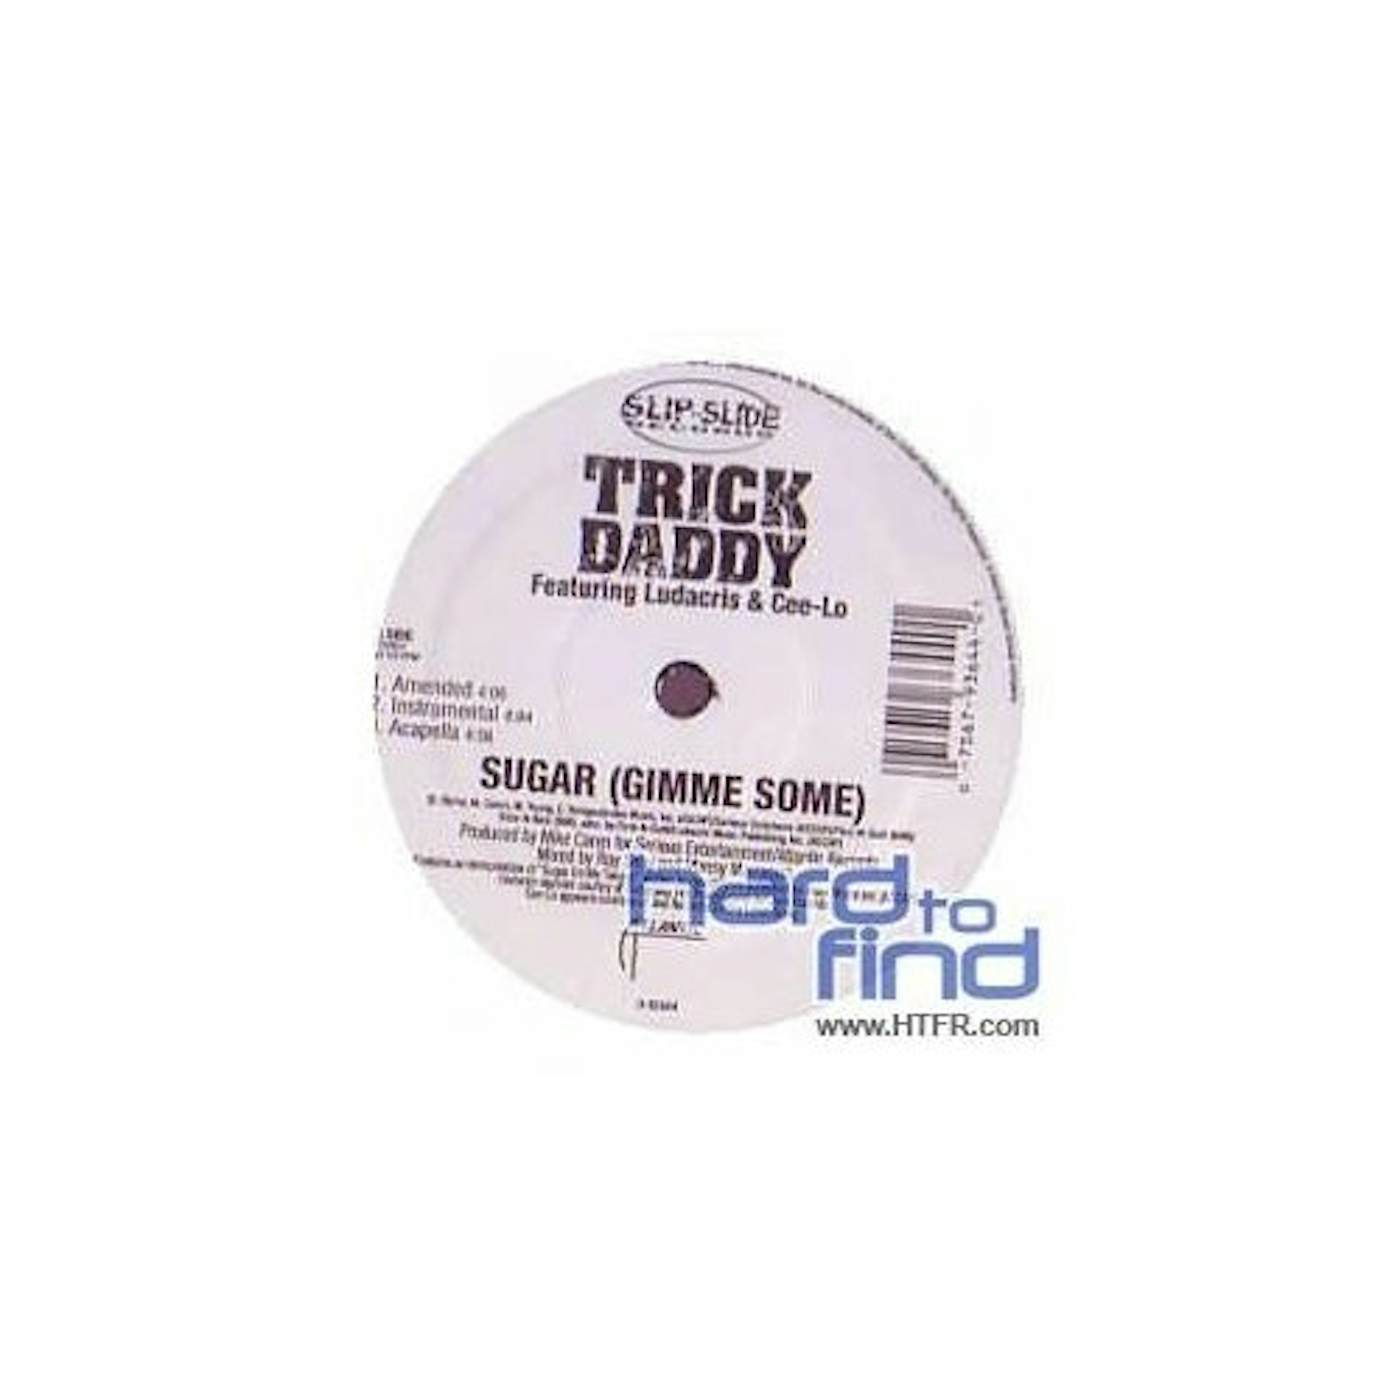 Trick Daddy SUGAR: GIMME SOME Vinyl Record